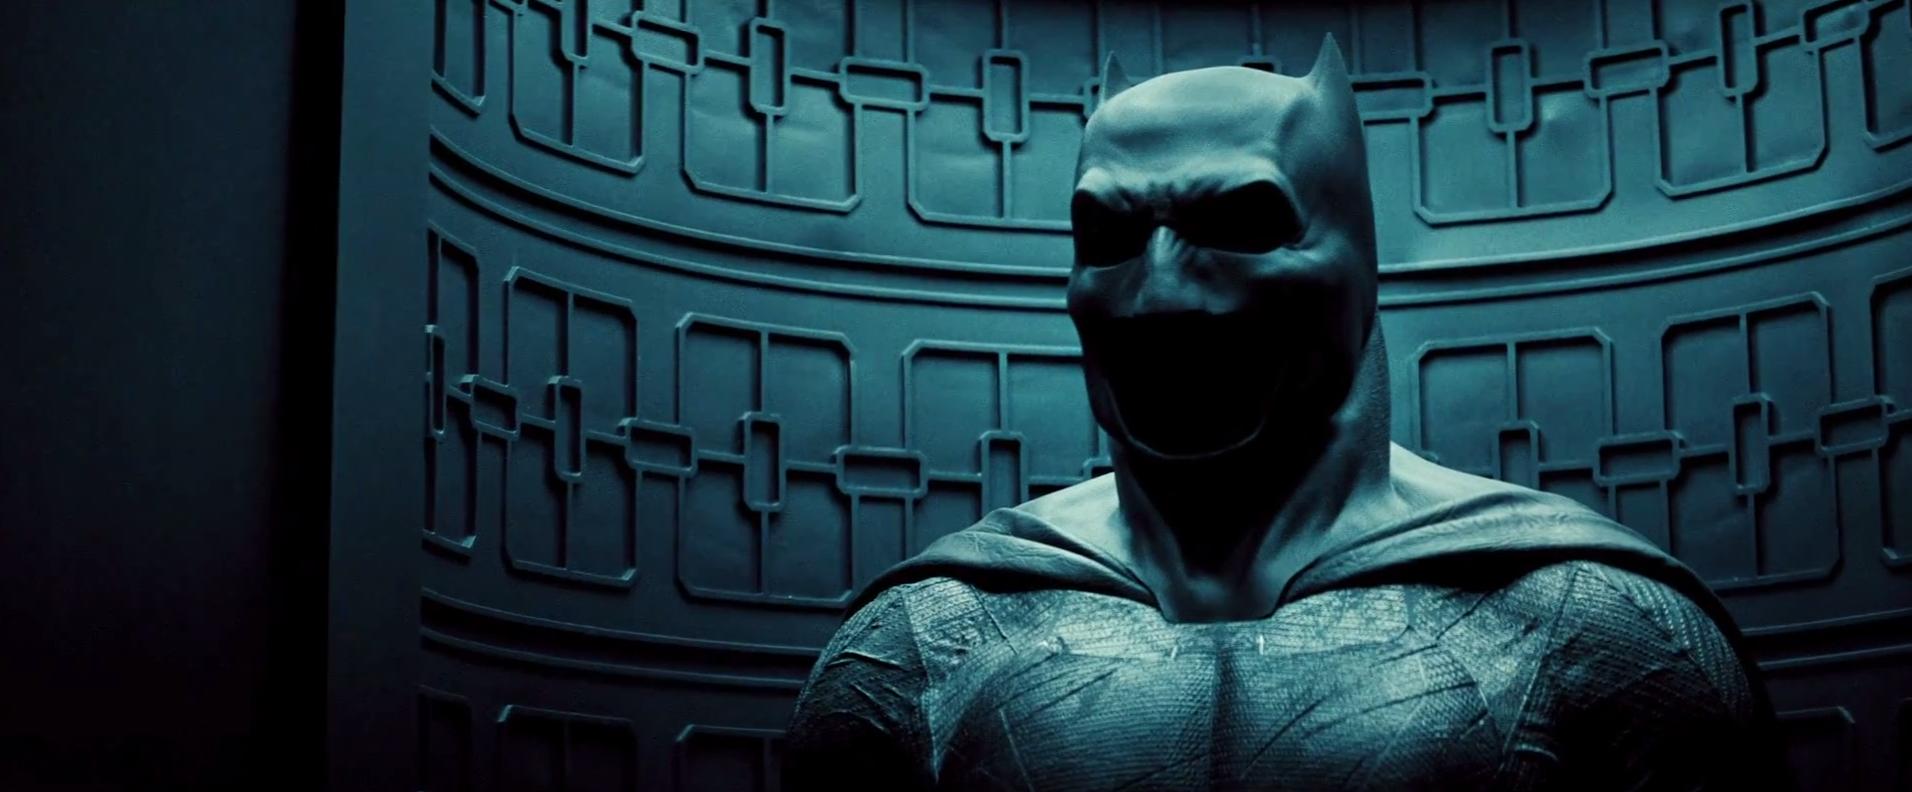 Is Batman v Superman: Dawn of Justice Going Too Far With Its Darkness?